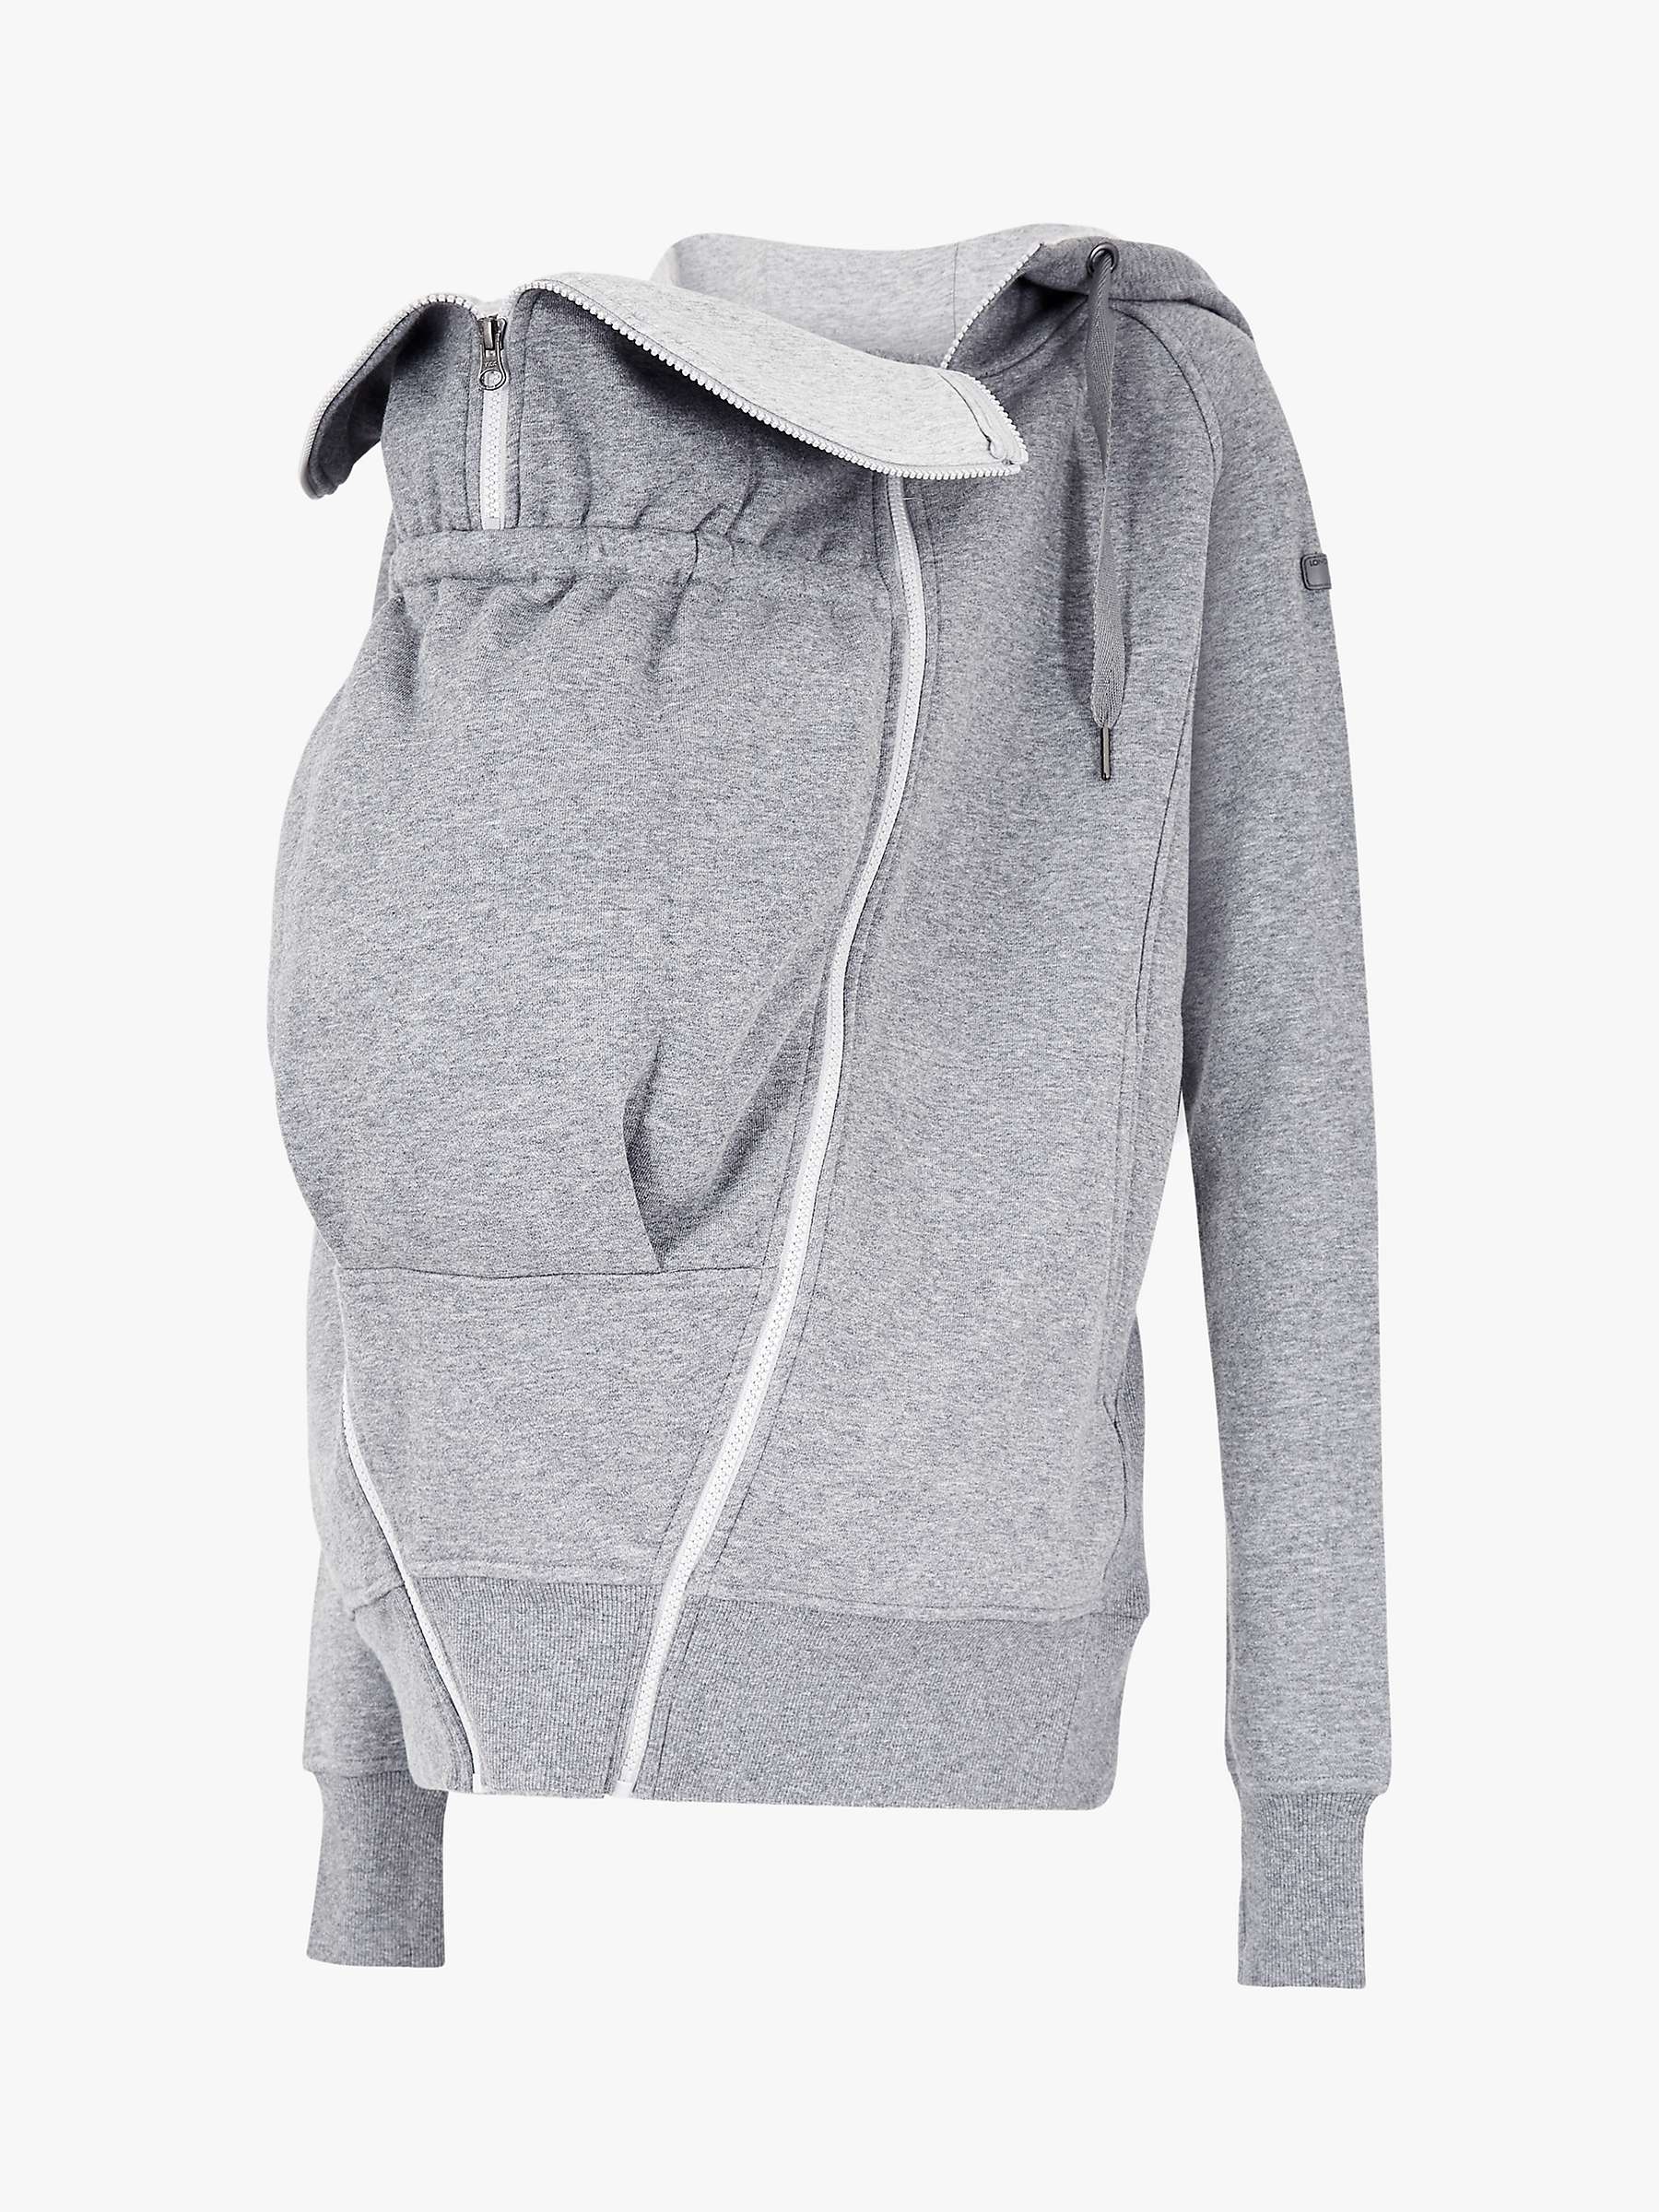 Buy Seraphine Connor 3-in-1 Maternity Hoodie, Charcoal Online at johnlewis.com